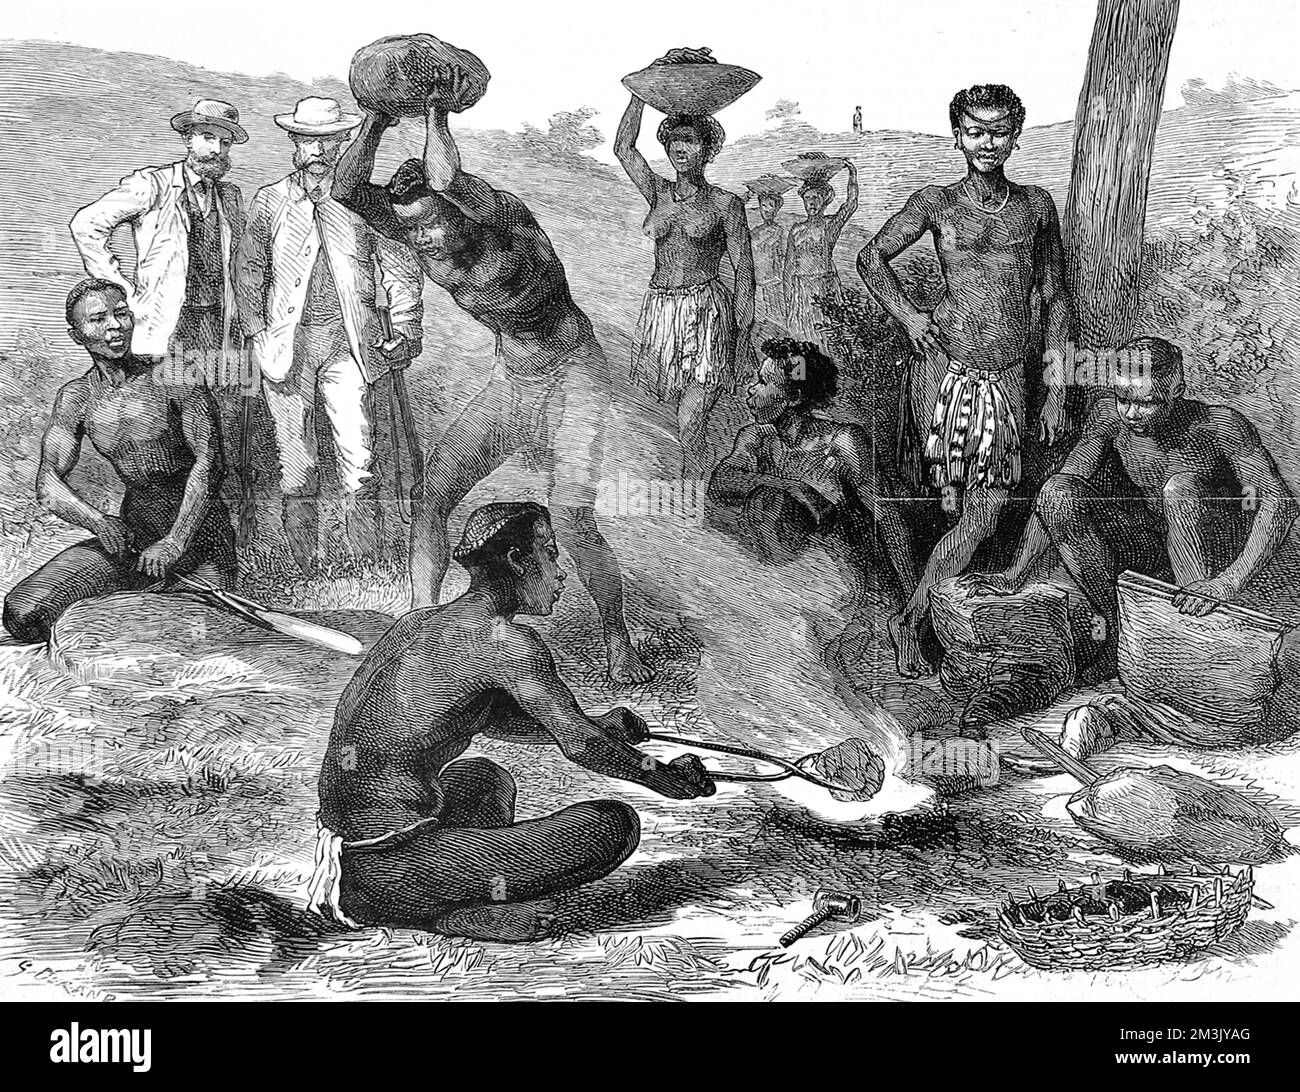 Scene depicting a Zulu making a spear in a fire and shaping it into the famous zulu weapon. Male and female zulus are in the foreground, while two European men watch in the background.  1879 Stock Photo